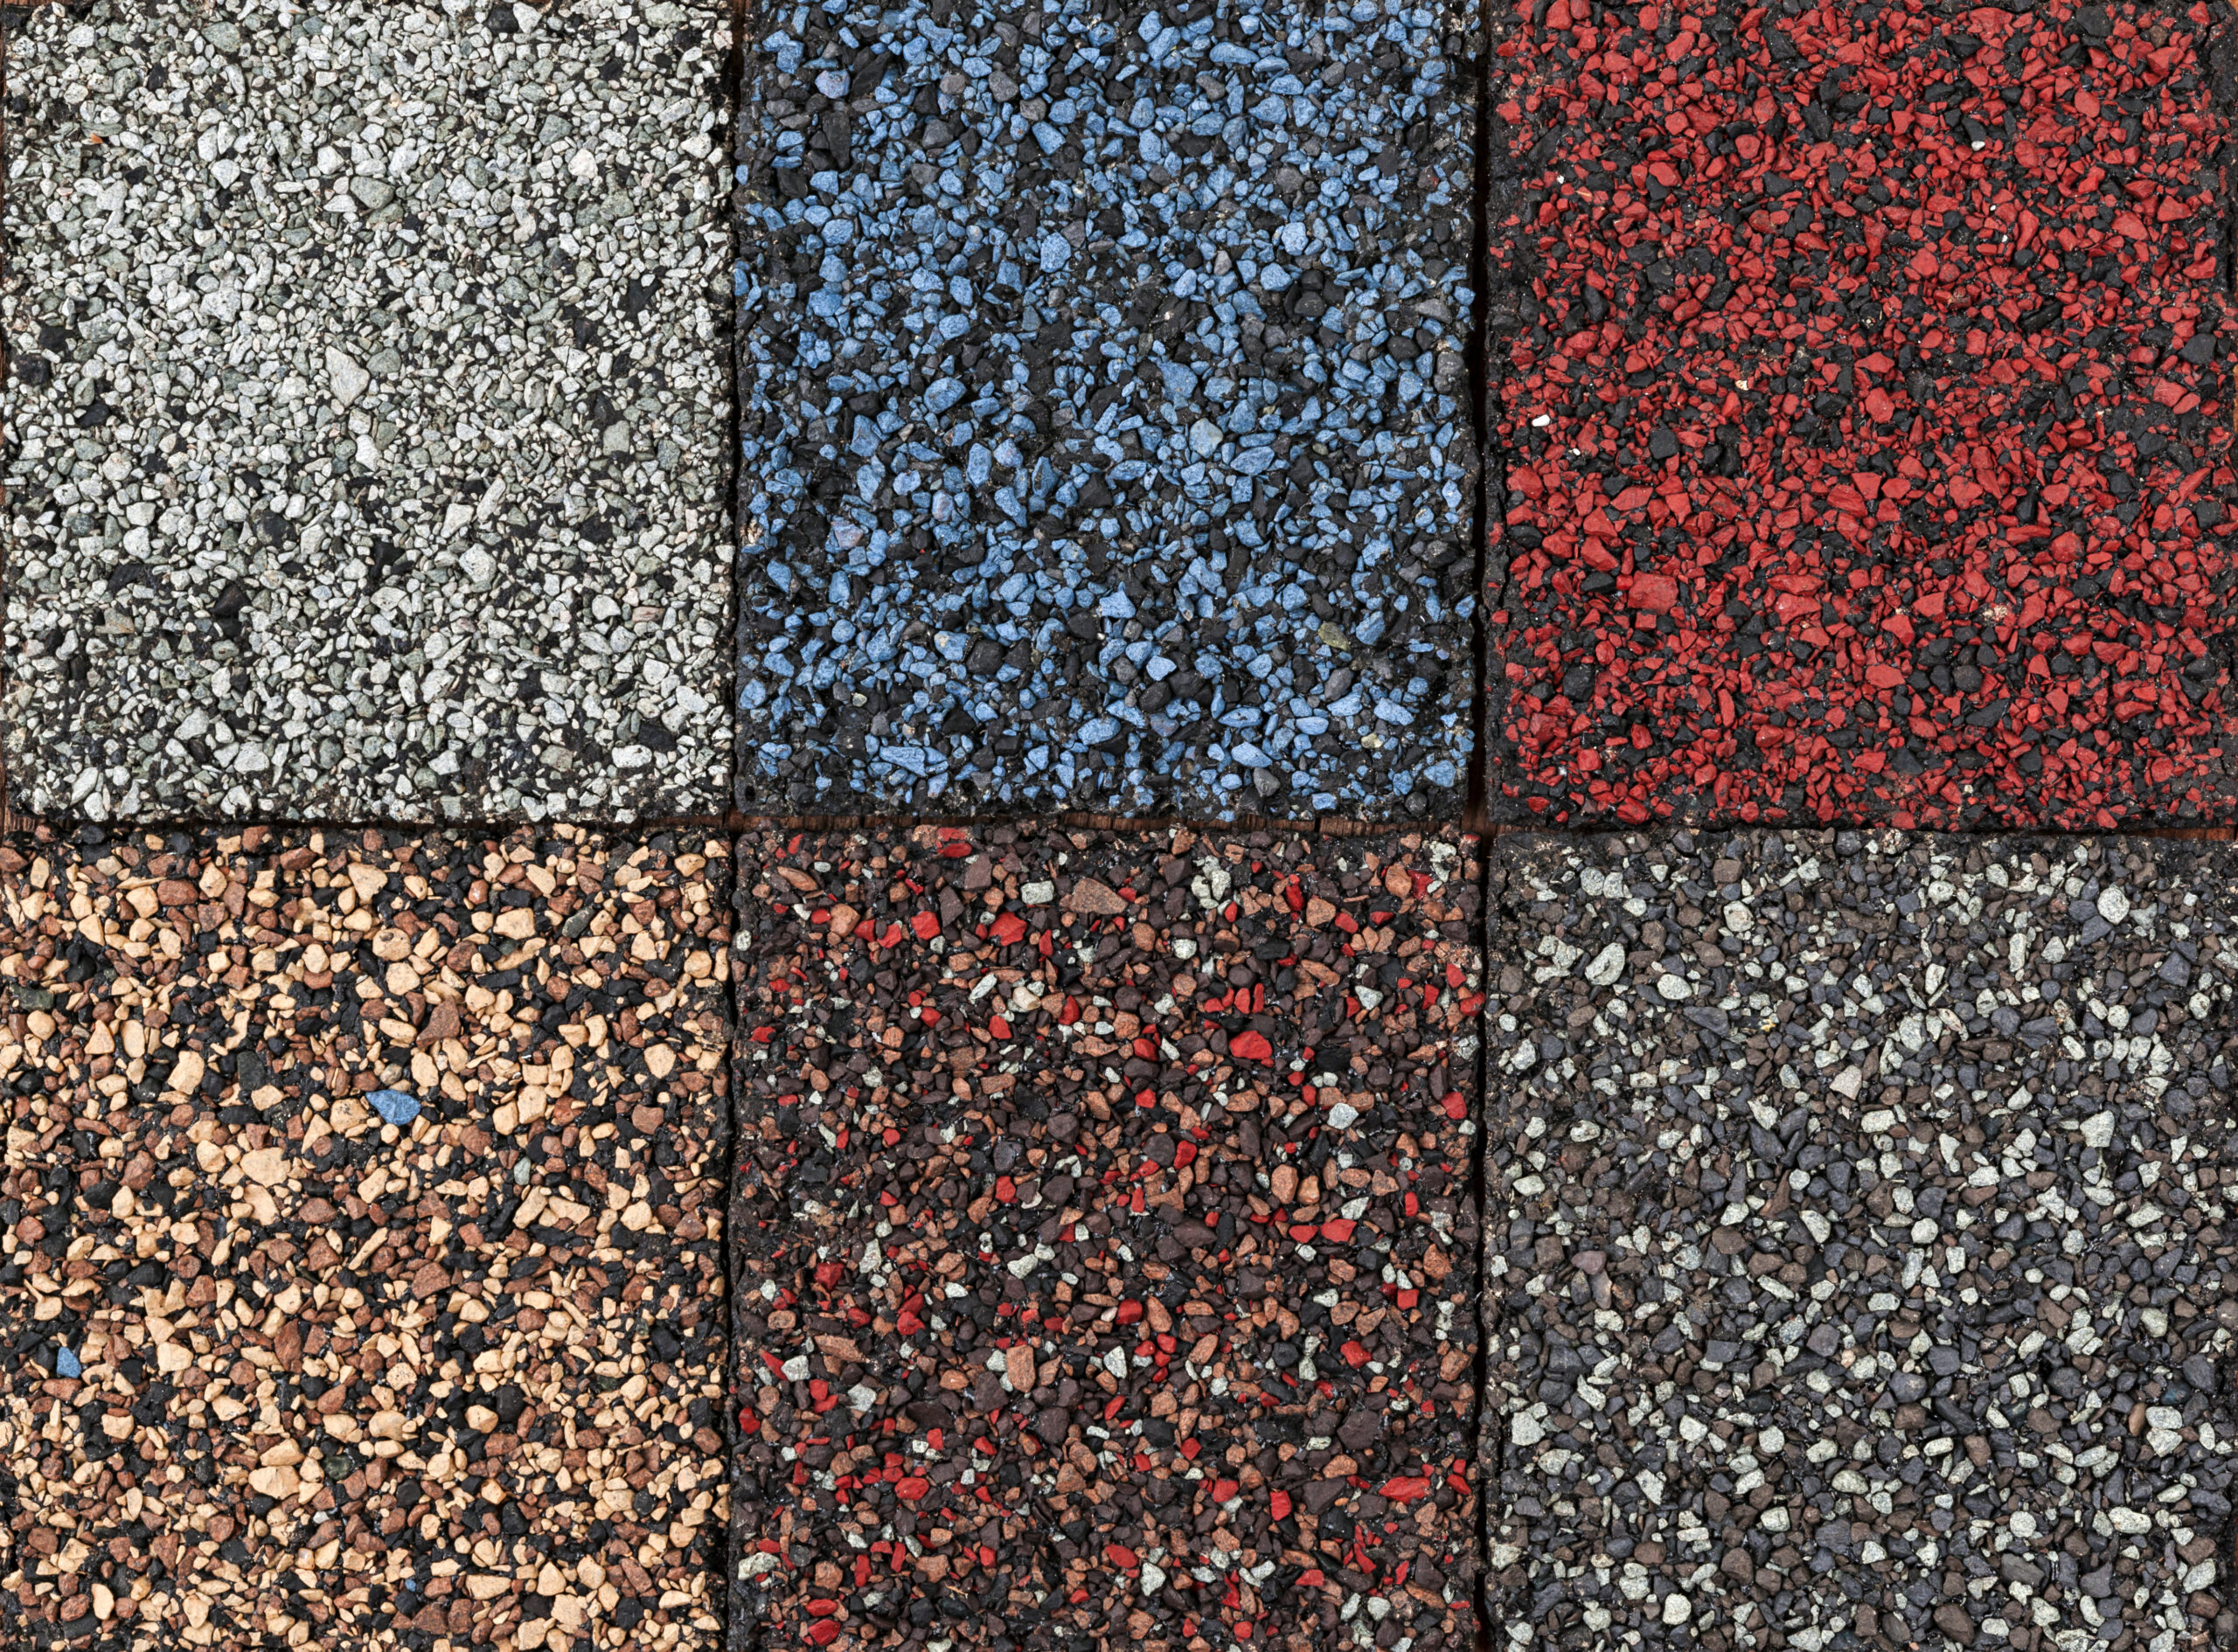 An image of six shingles in different colors, placed side-by-side